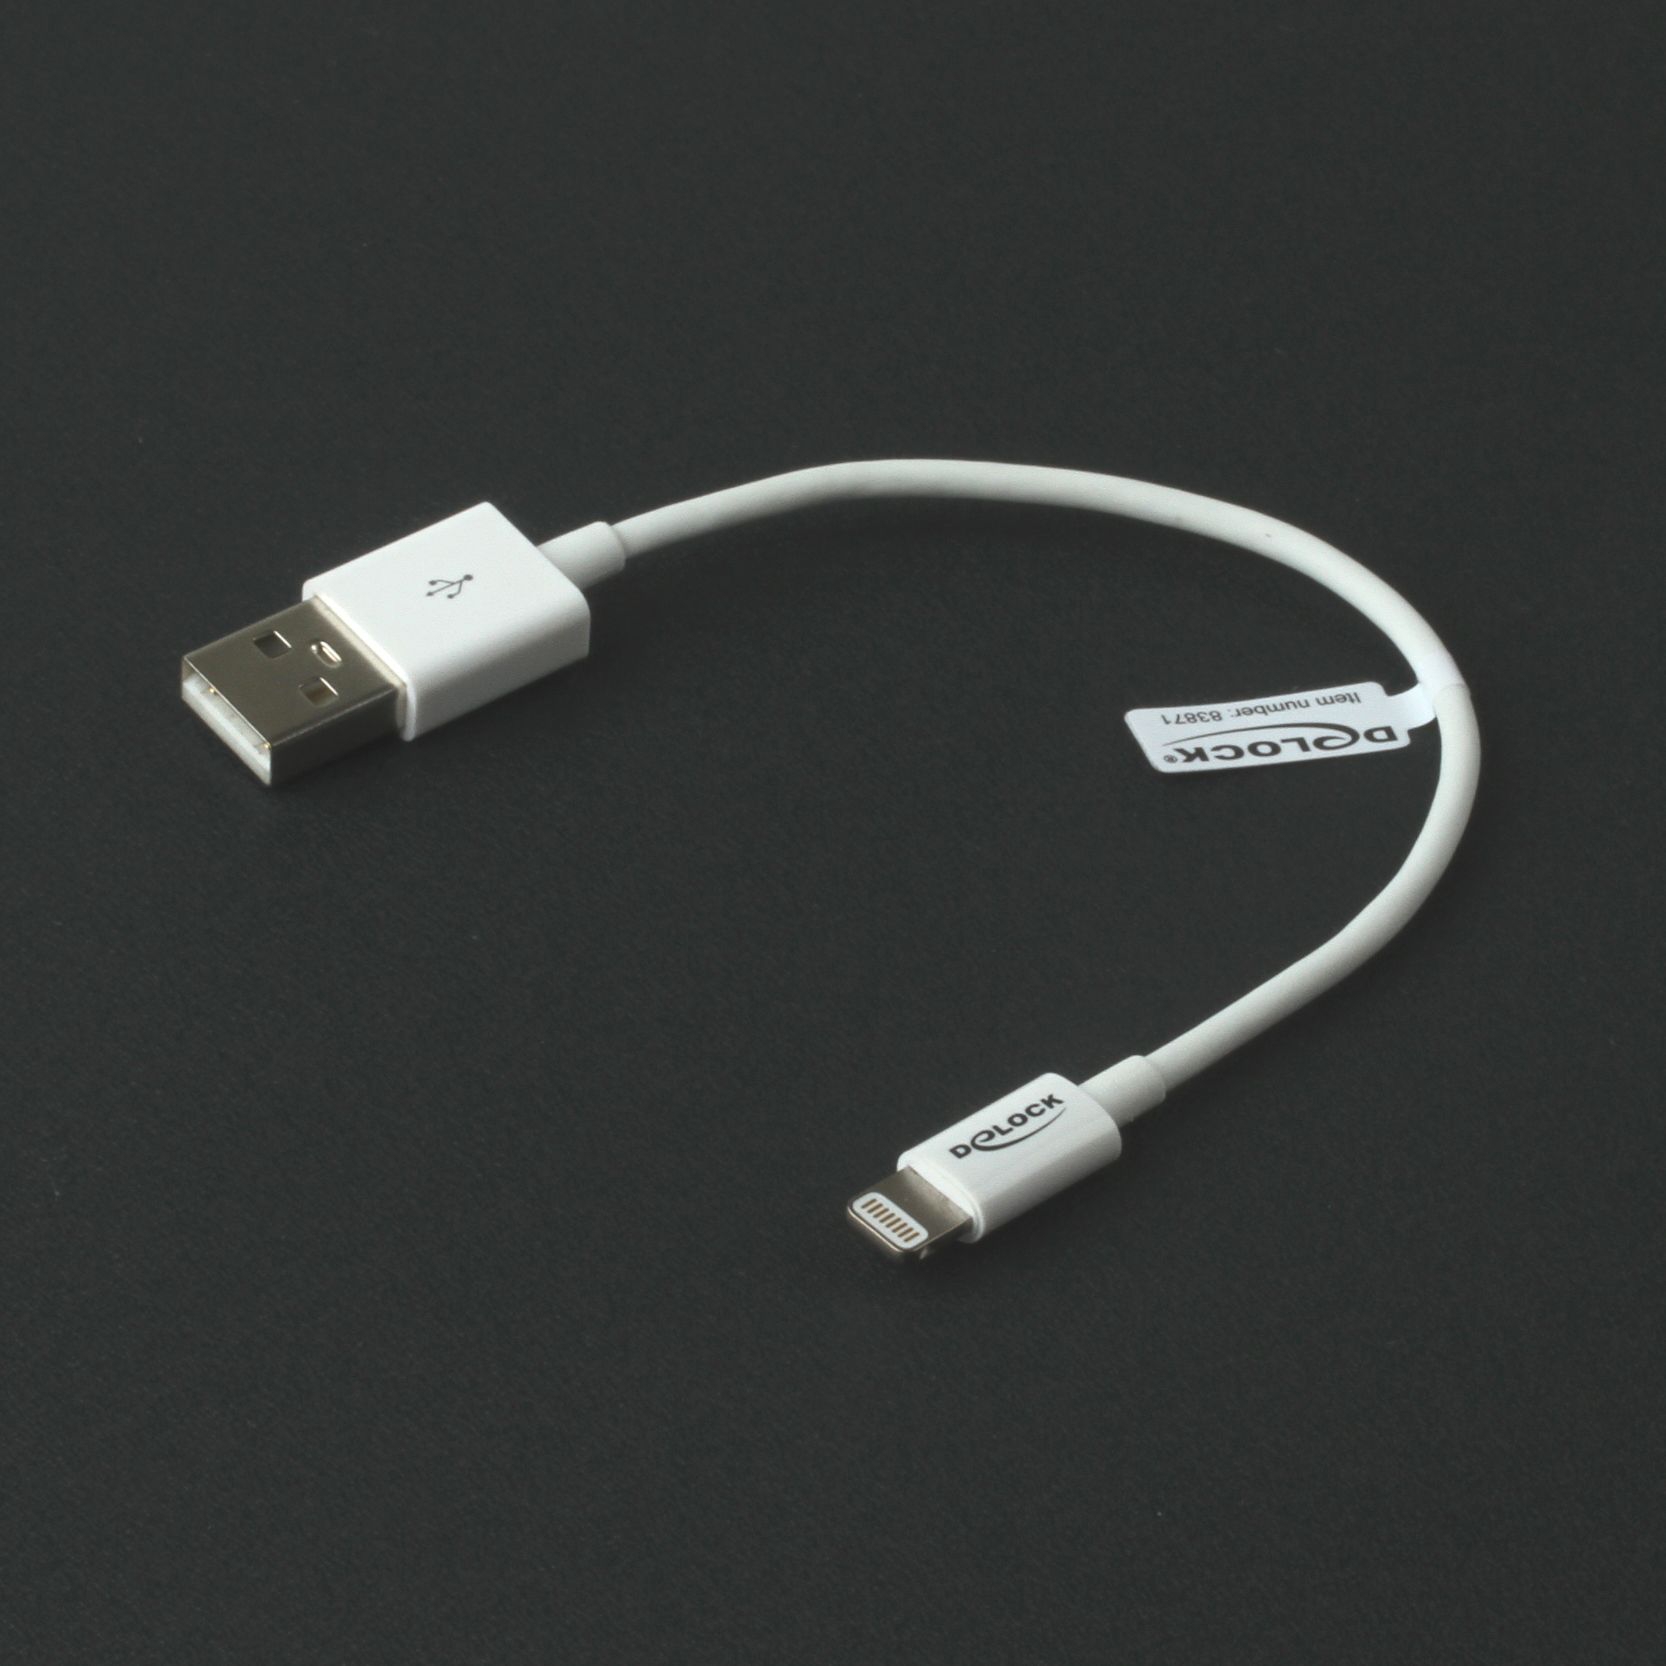 Charge & Sync cable for iPhone 6, iPhone 5, iPad mini... (for Apple Lightning port) 15cm